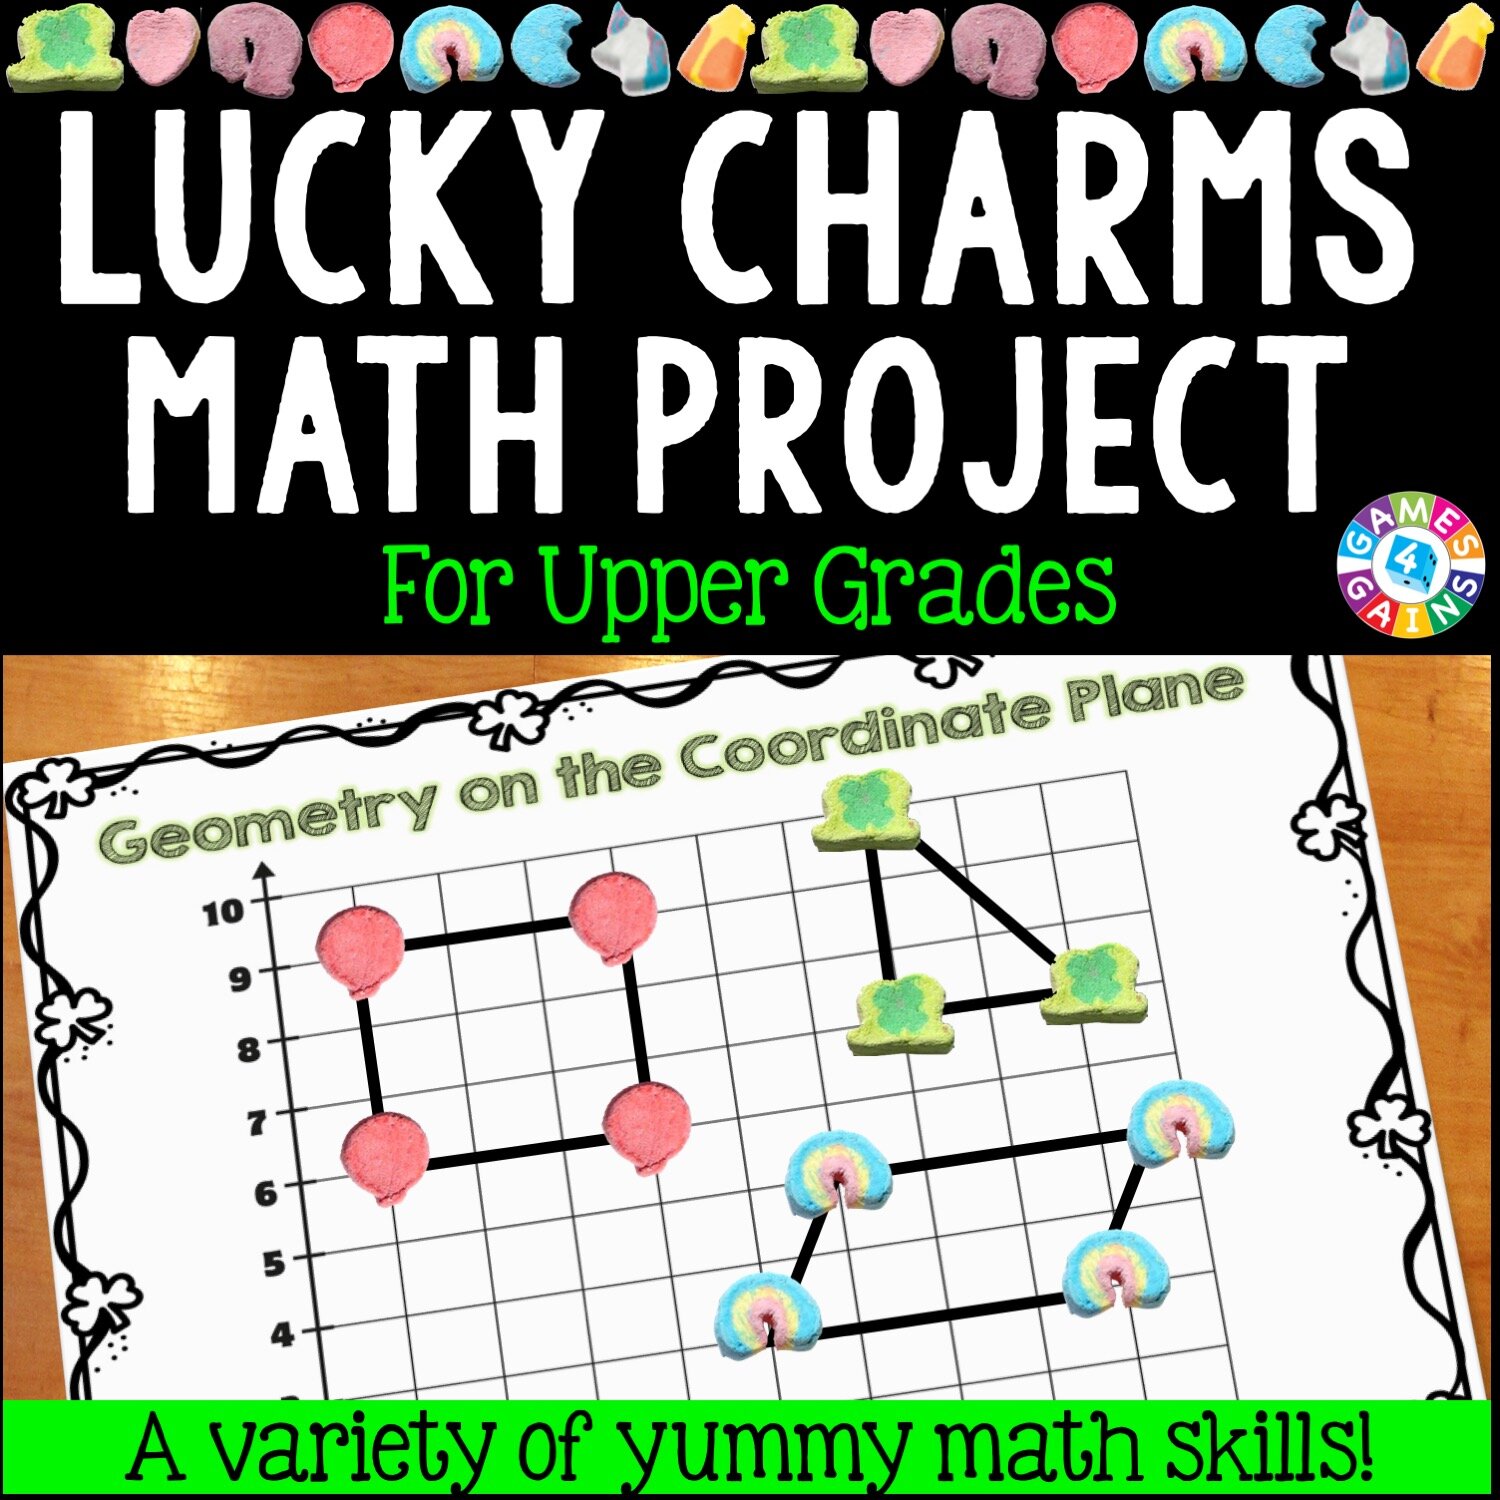 Lucky Charms Math Project Cover 2020.jpg